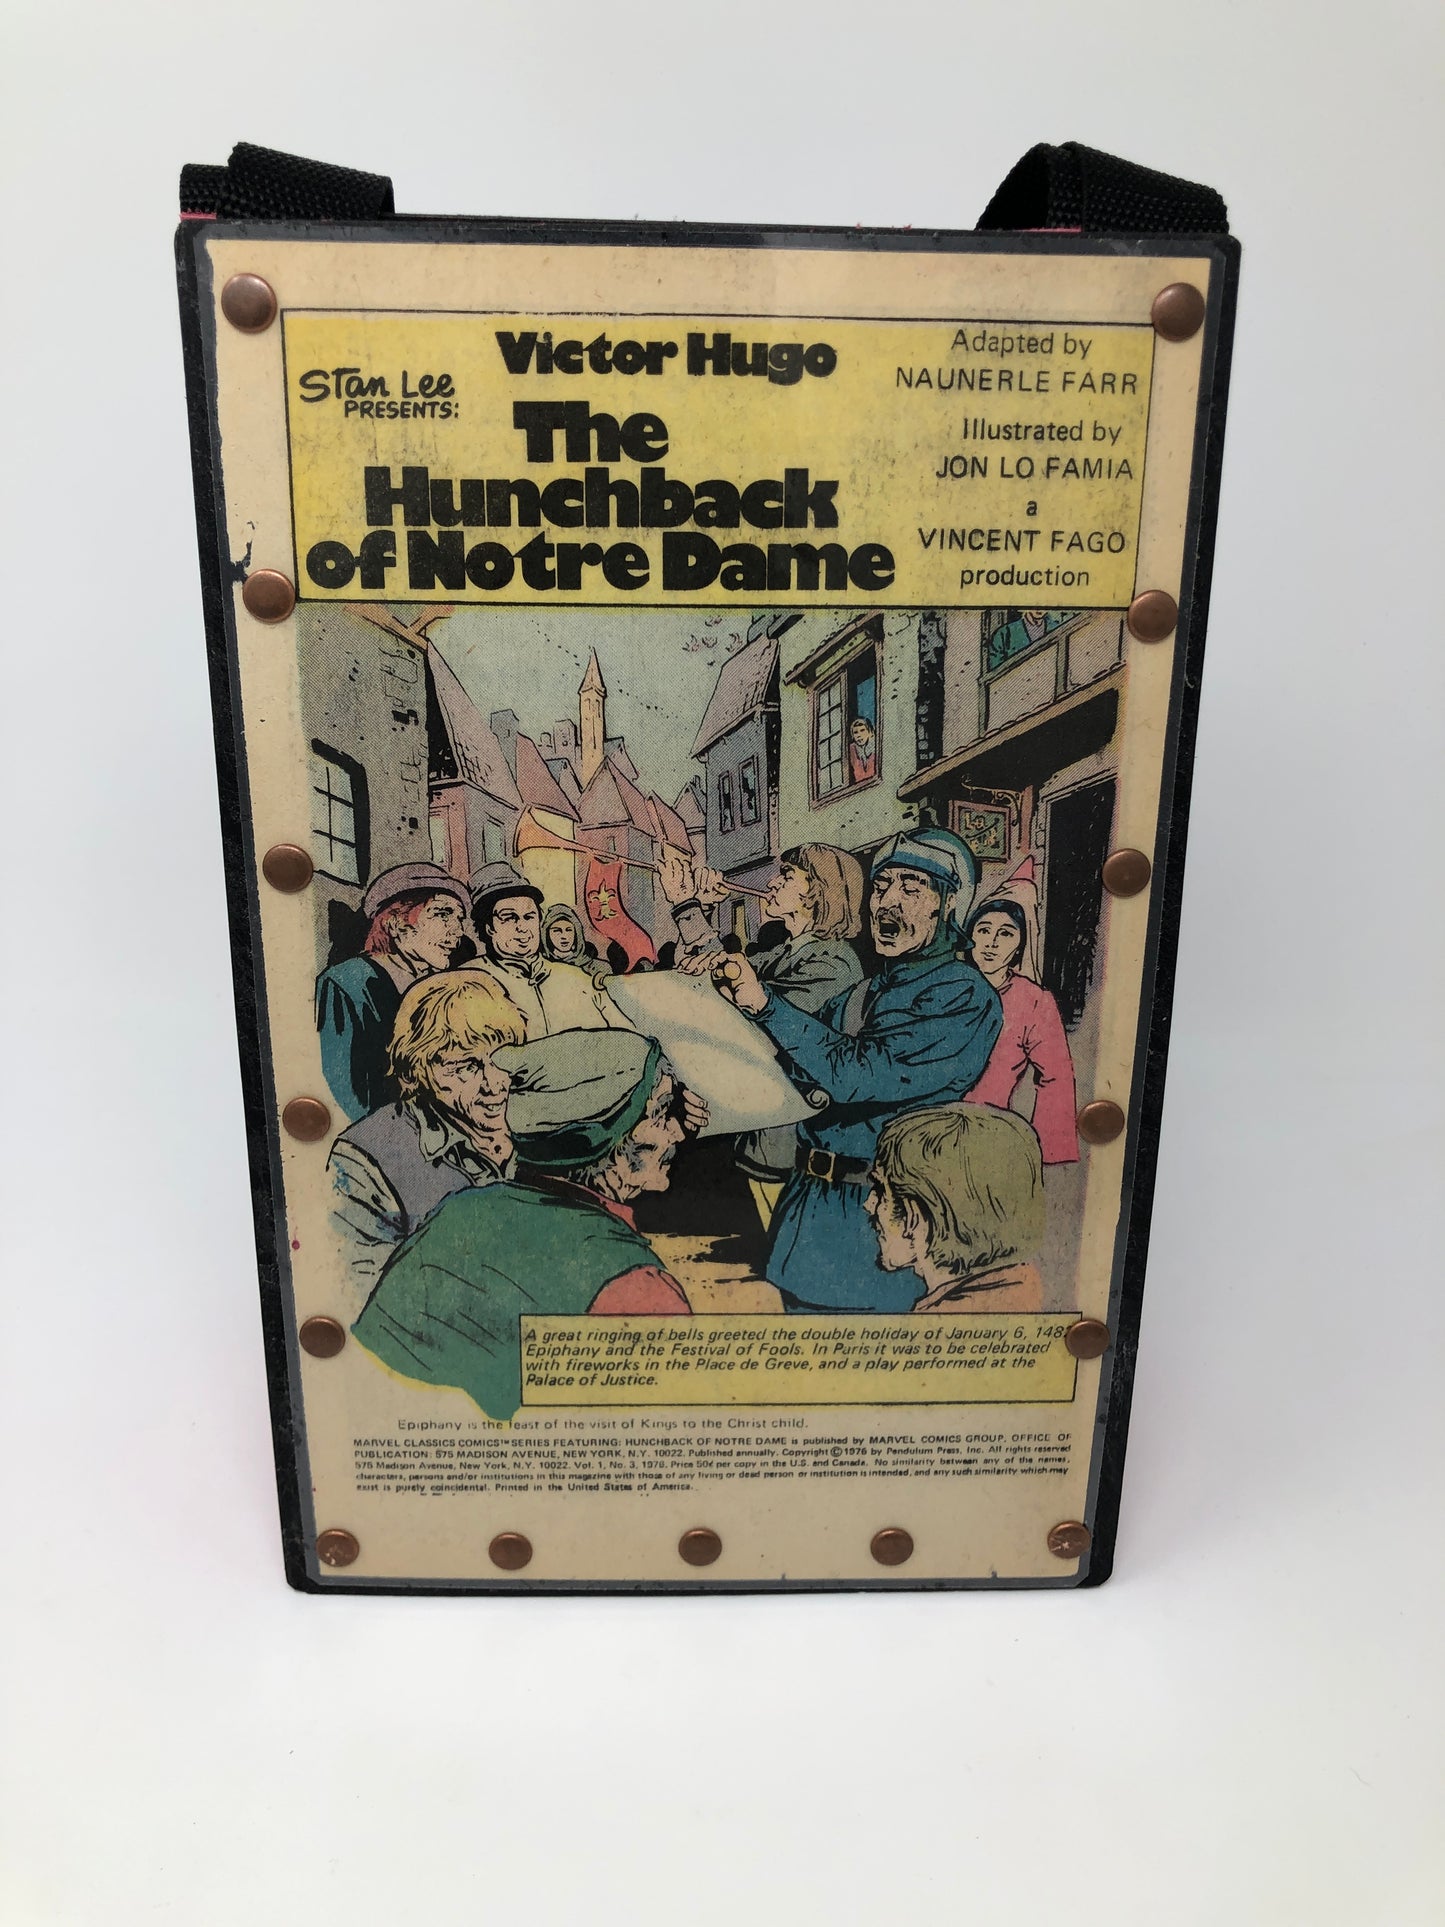 Vintage Comic Book Purse - The Hunchback of Notre Dame 1976